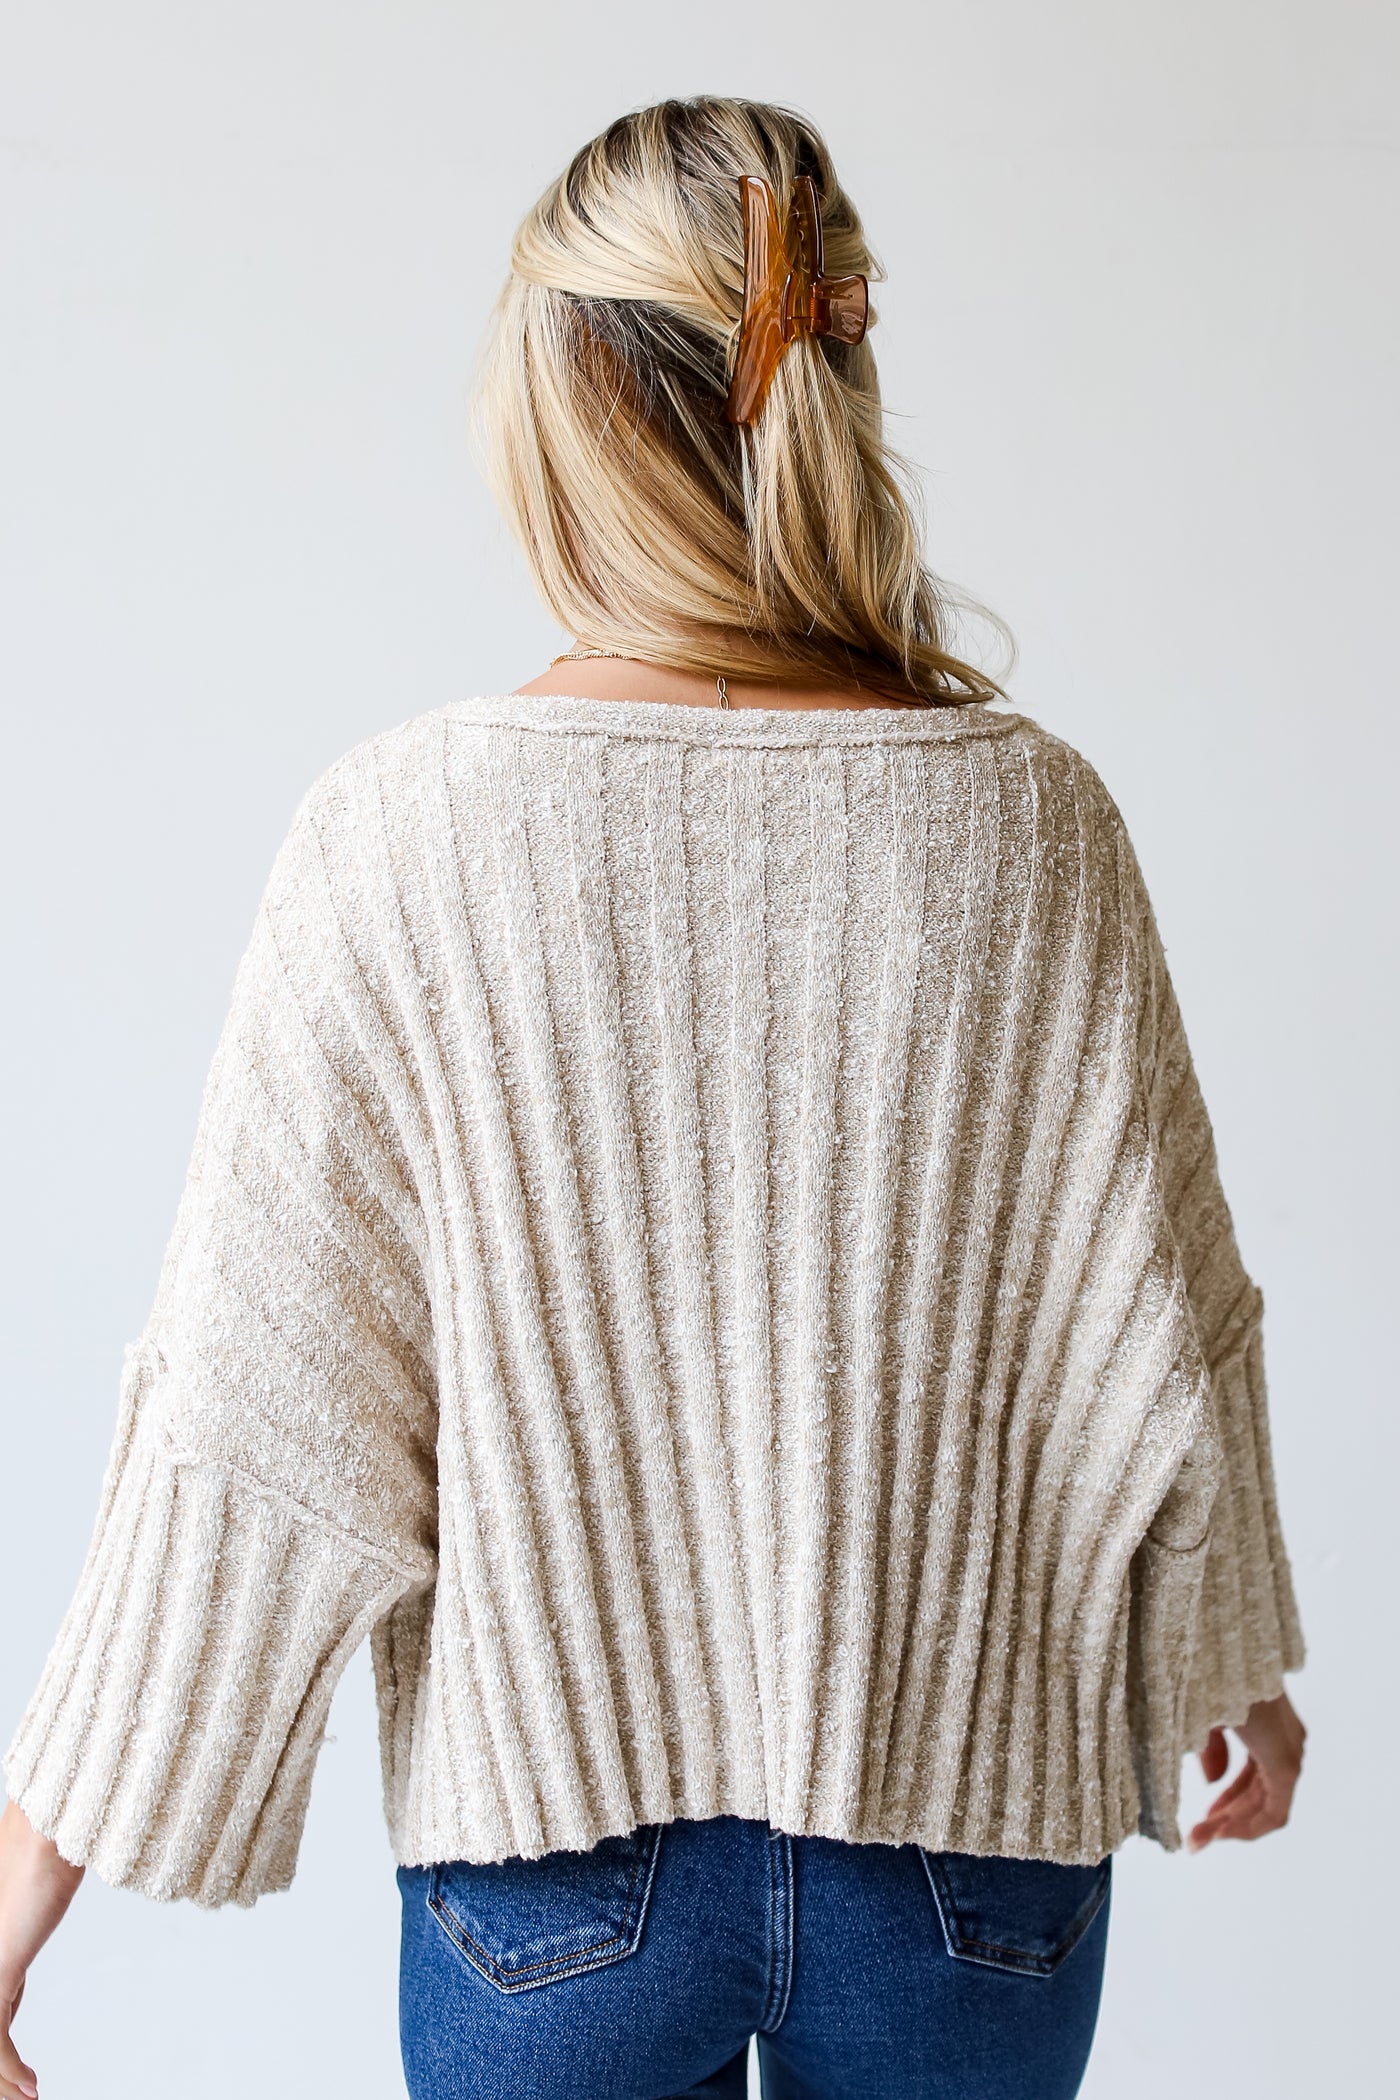 taupe Sweater back view